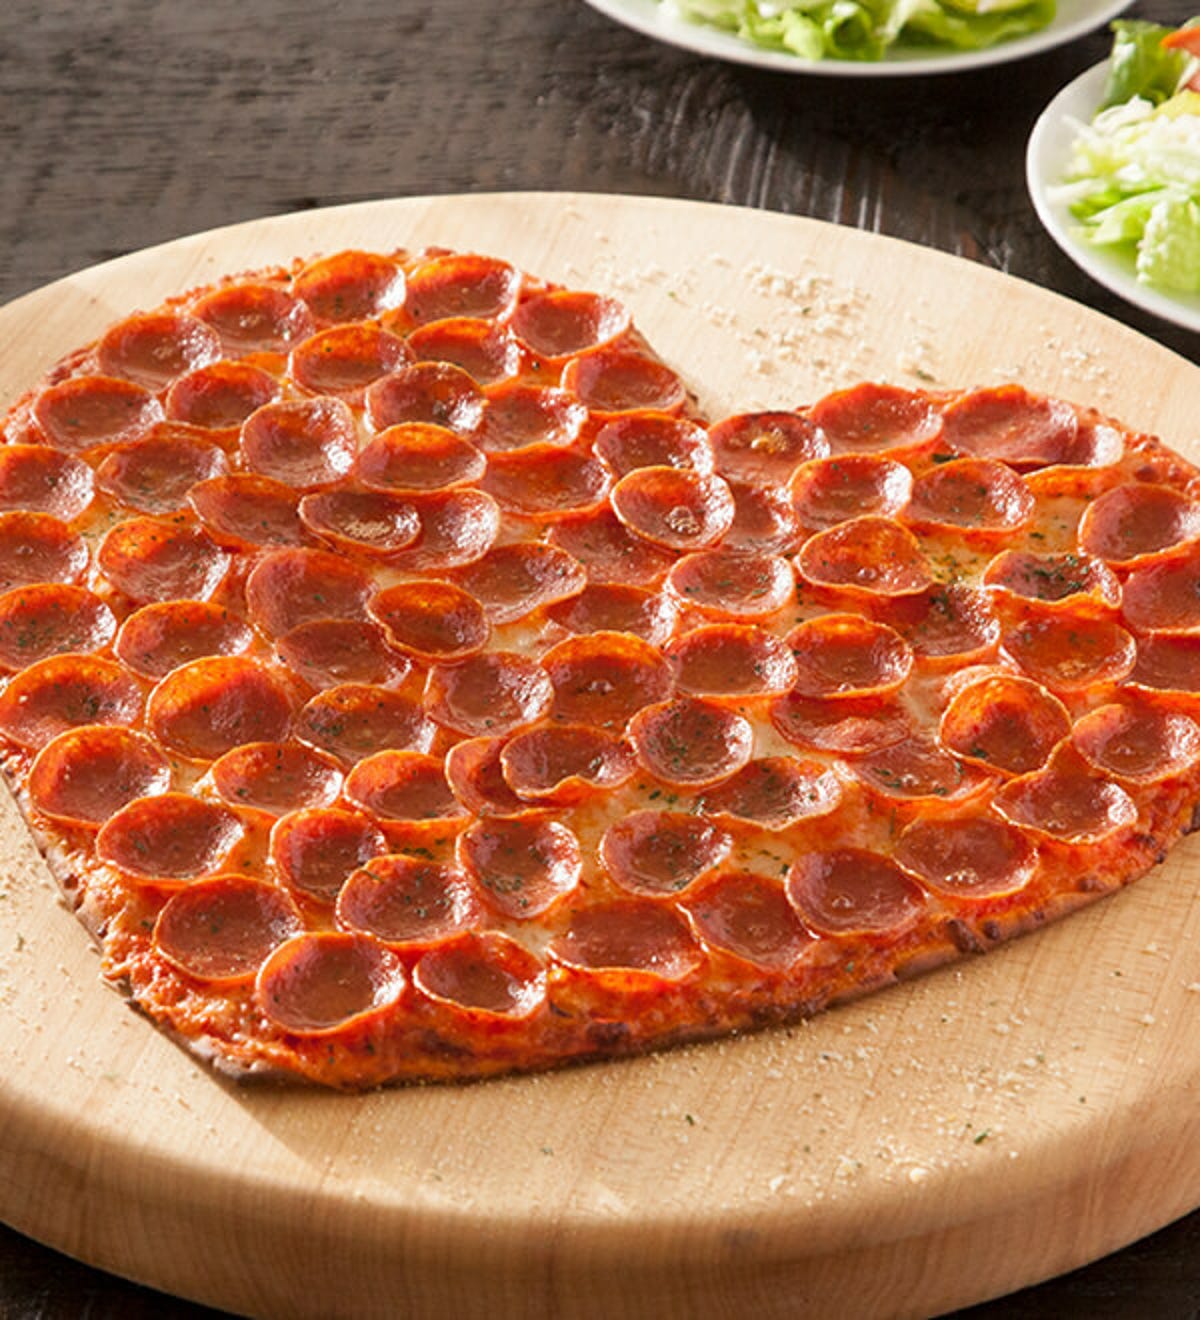 A heart-shaped pepperoni pizza from Donatos